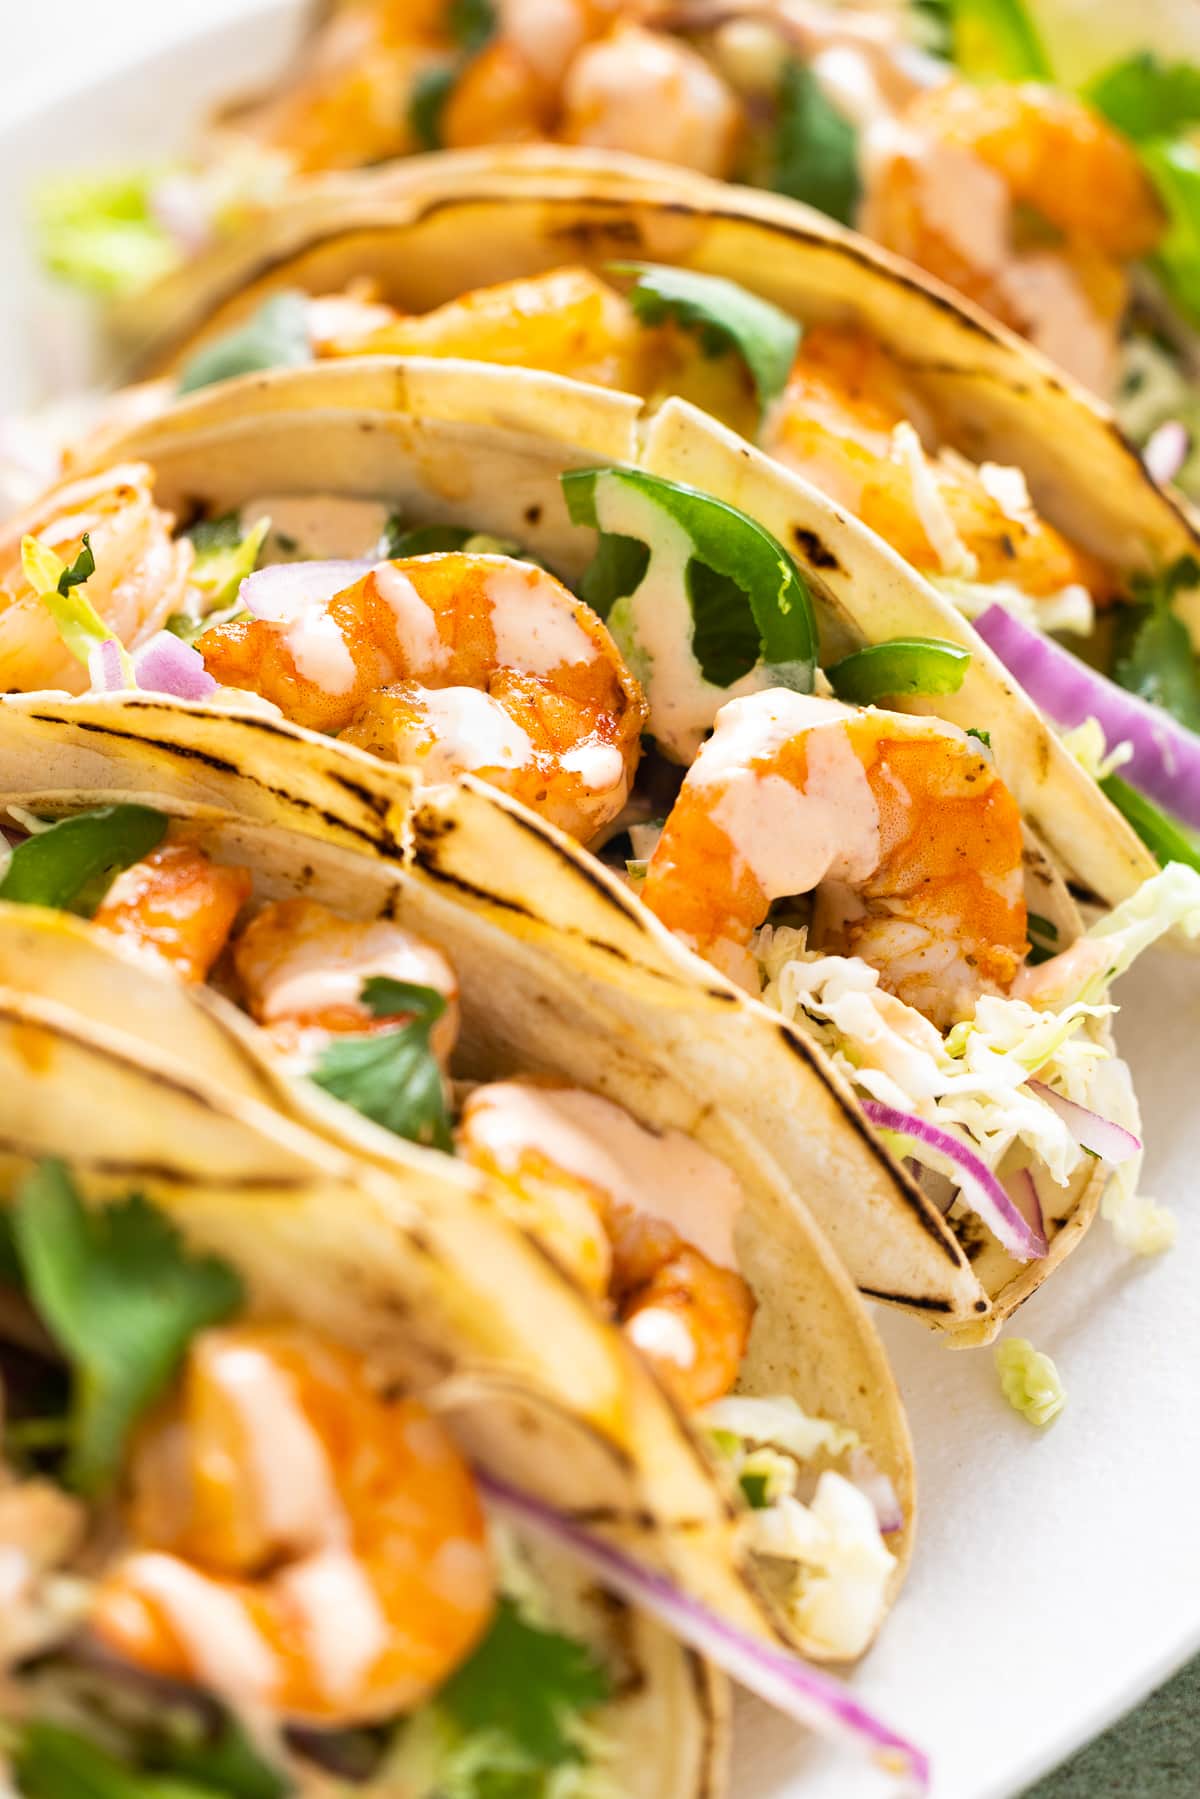 Tacos for Everyone with a Variety of Proteins and Vegetarian